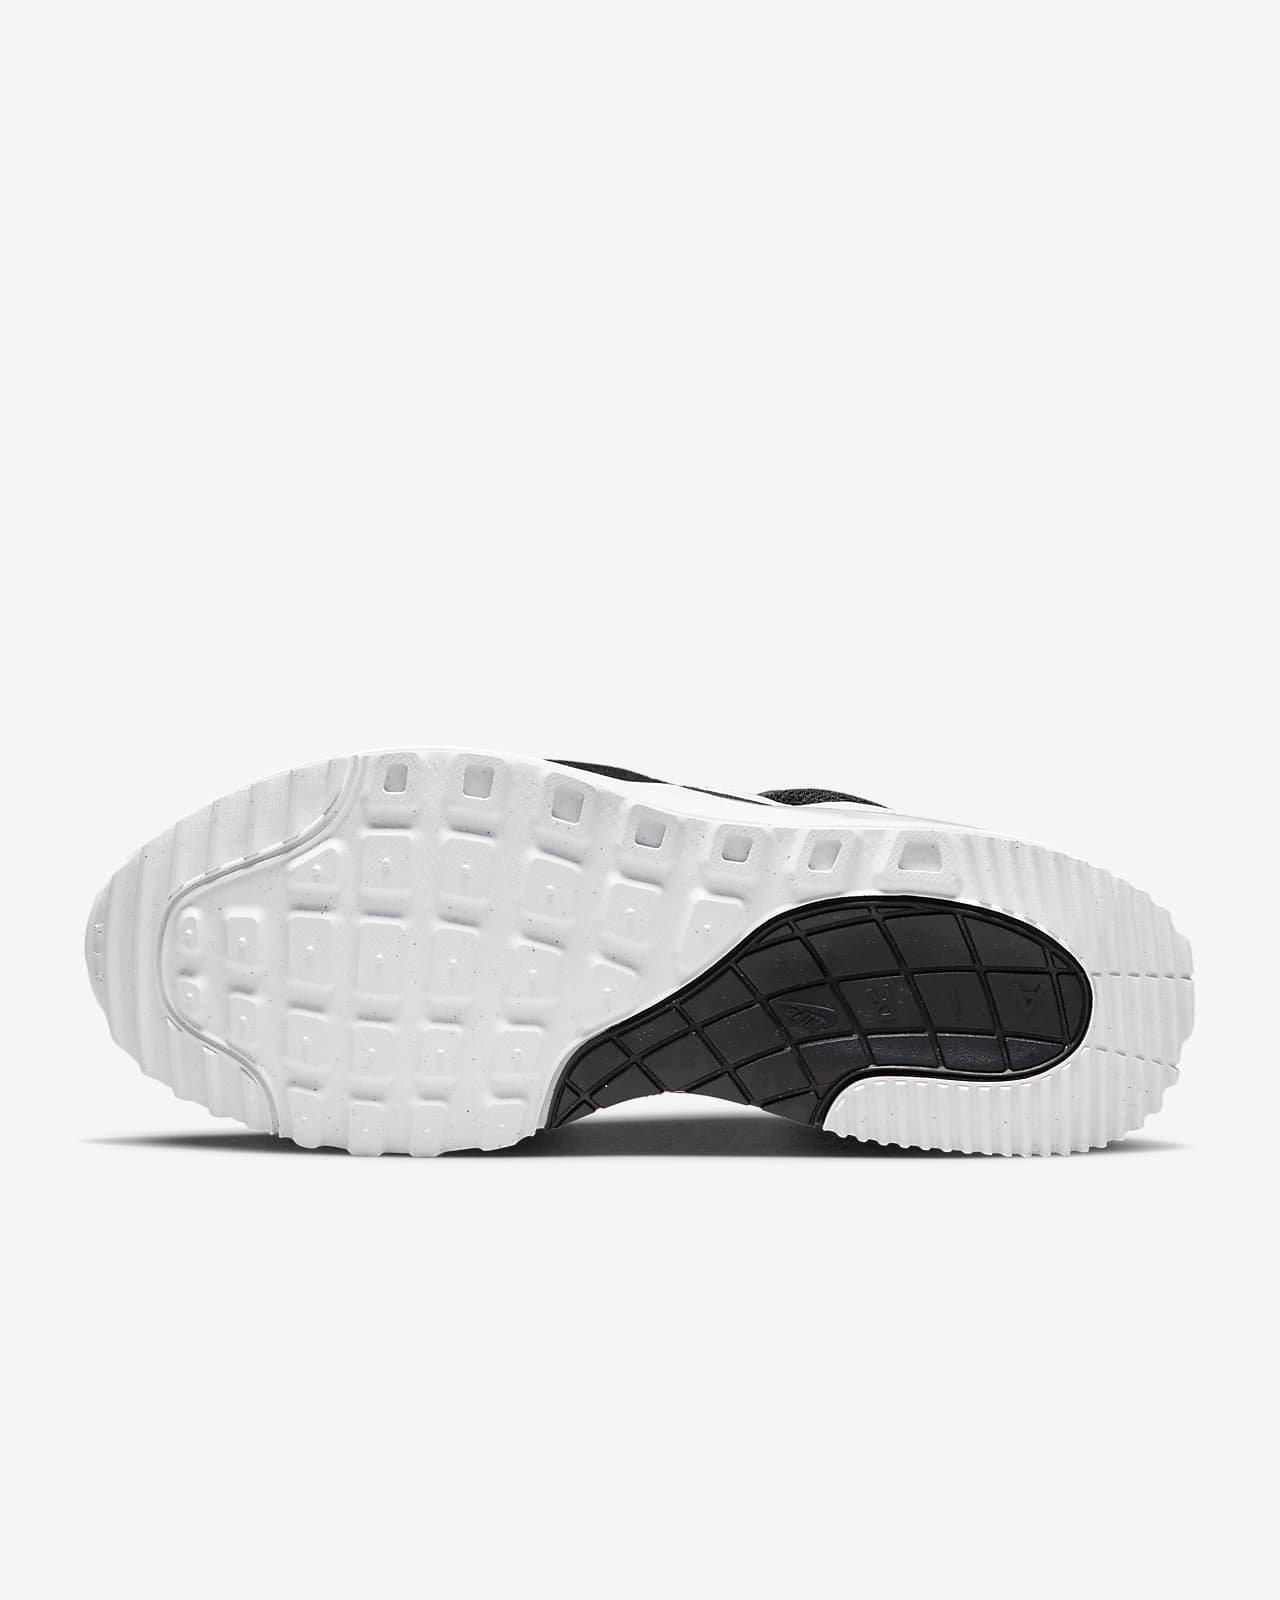 Air SYSTM Women's Shoes. Nike